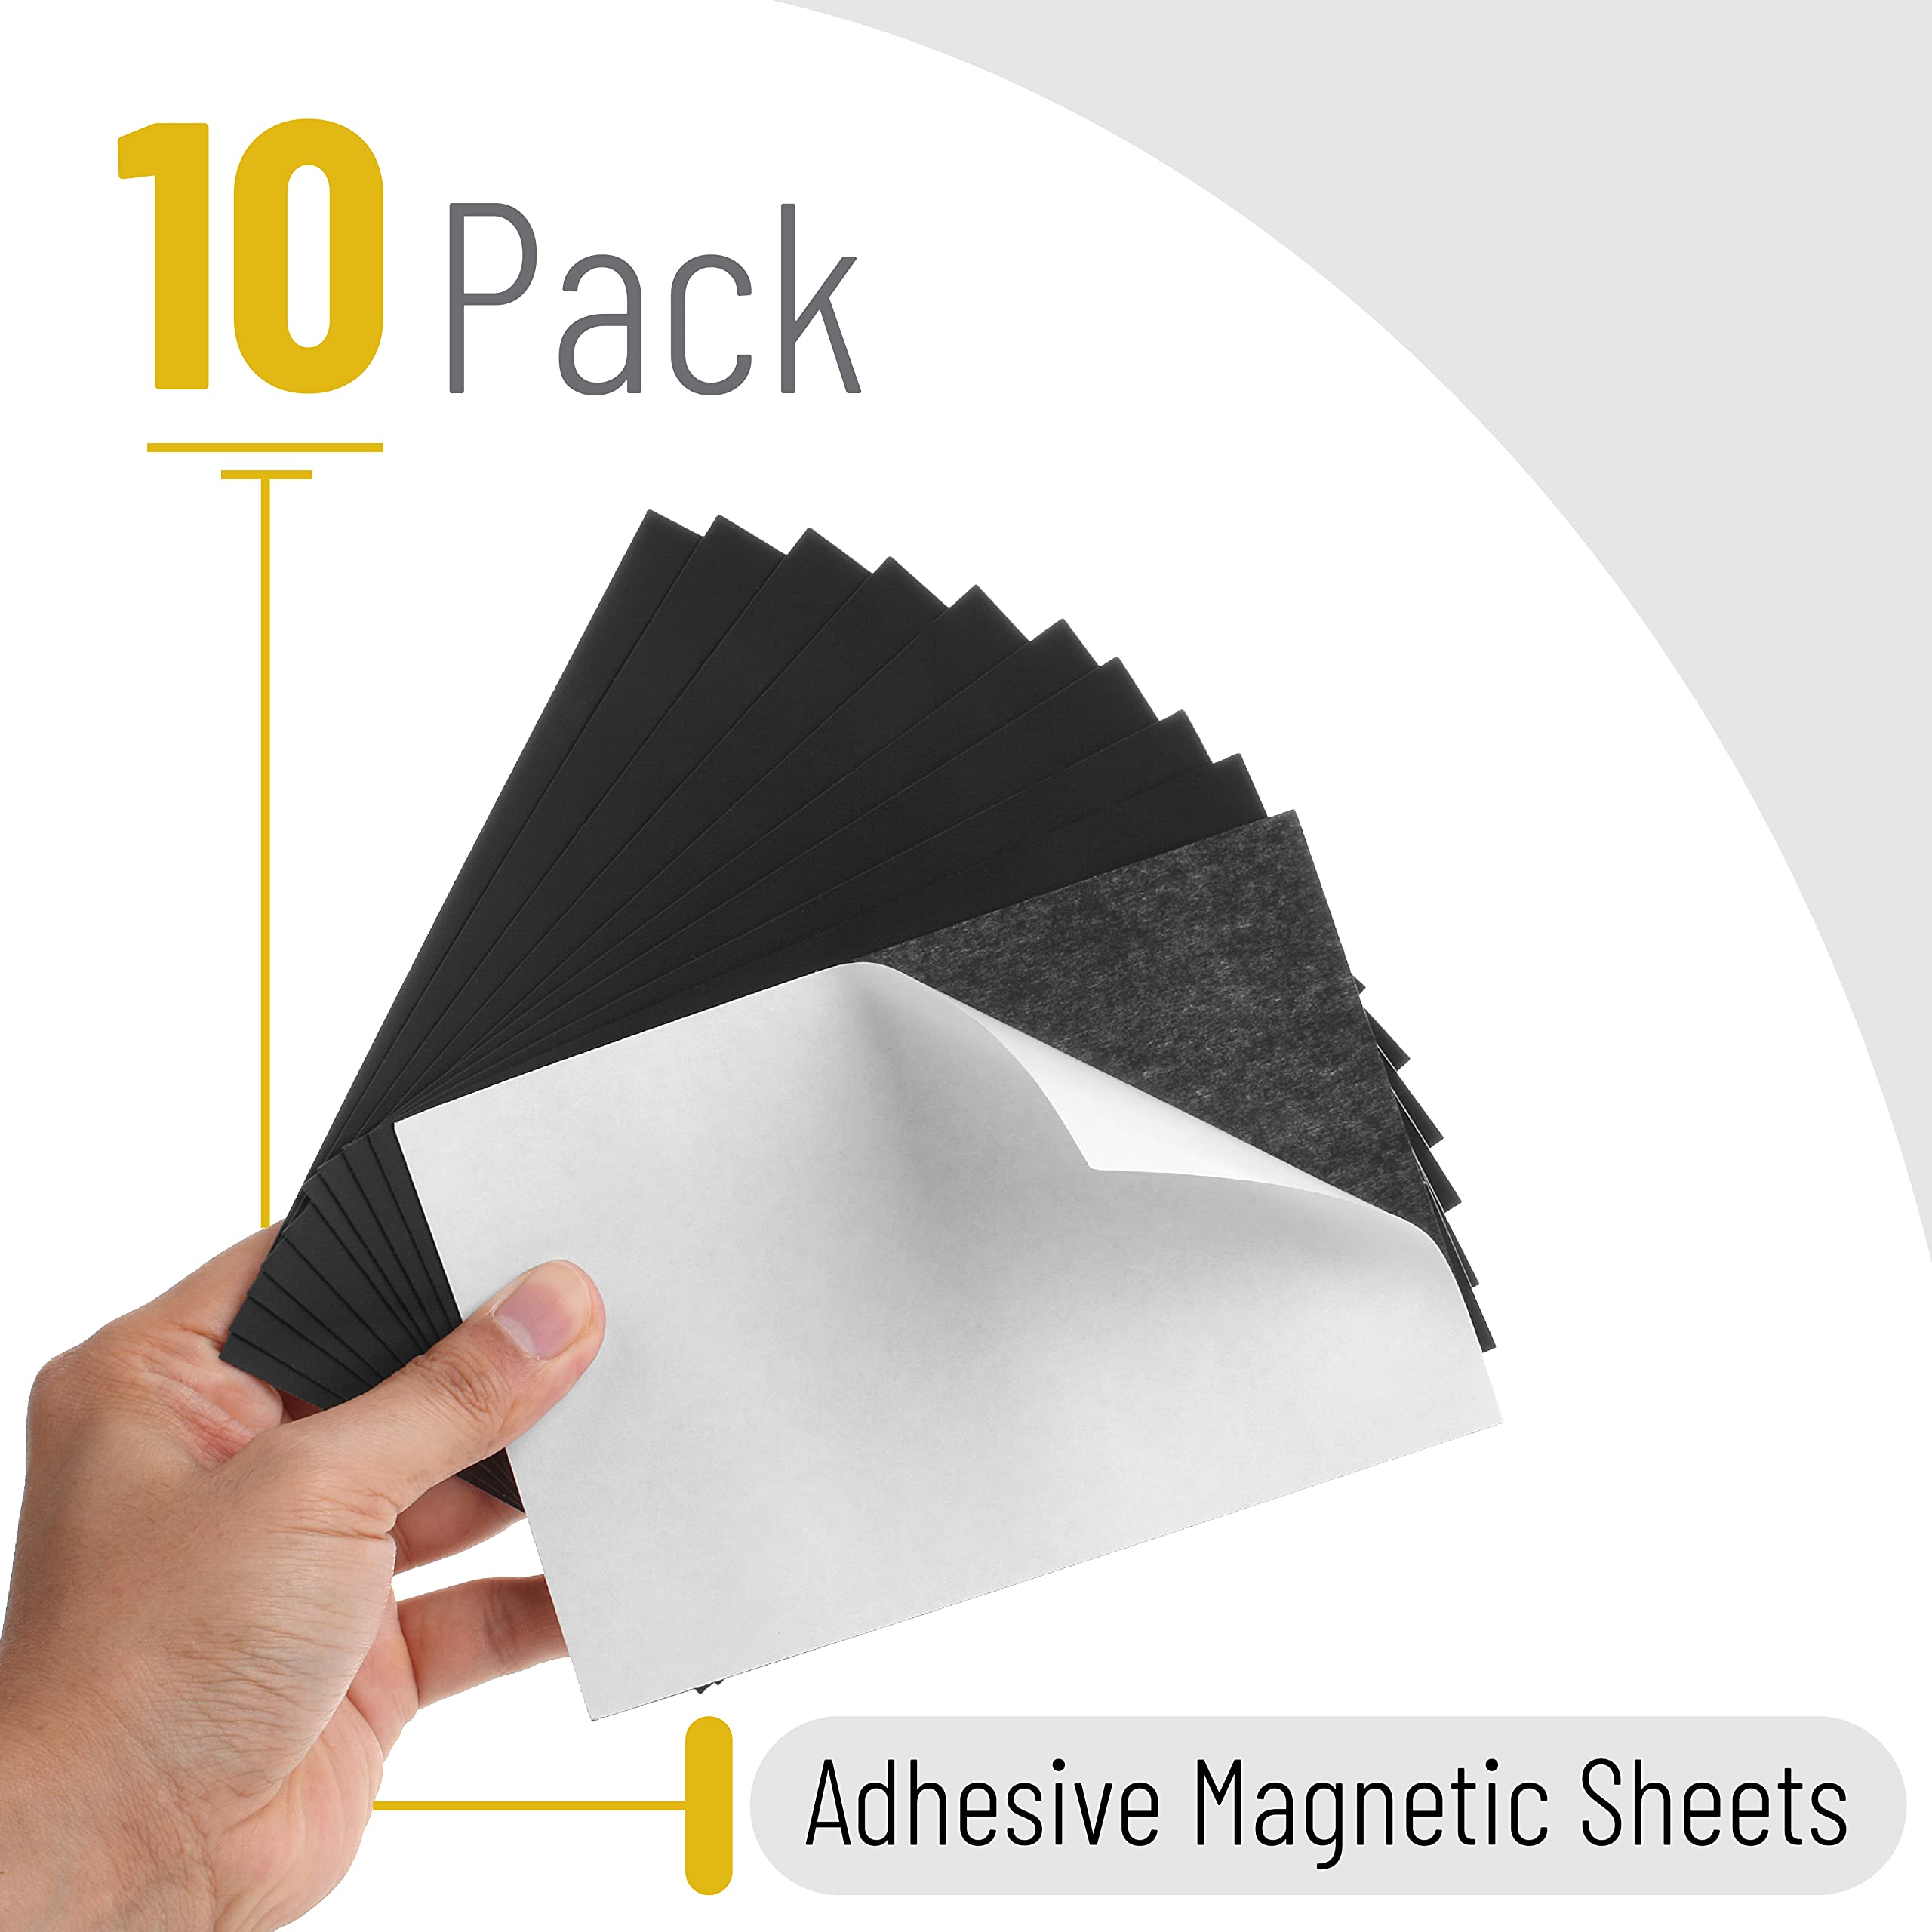  HTVRONT Magnetic Sheets with Adhesive Backing - 10 Pack 4x6  Magnet Sheets with Adhesive,Easy to Cut Flexible Adhesive Magnetic Sheets  for Dies Storage,Crafts, Photos